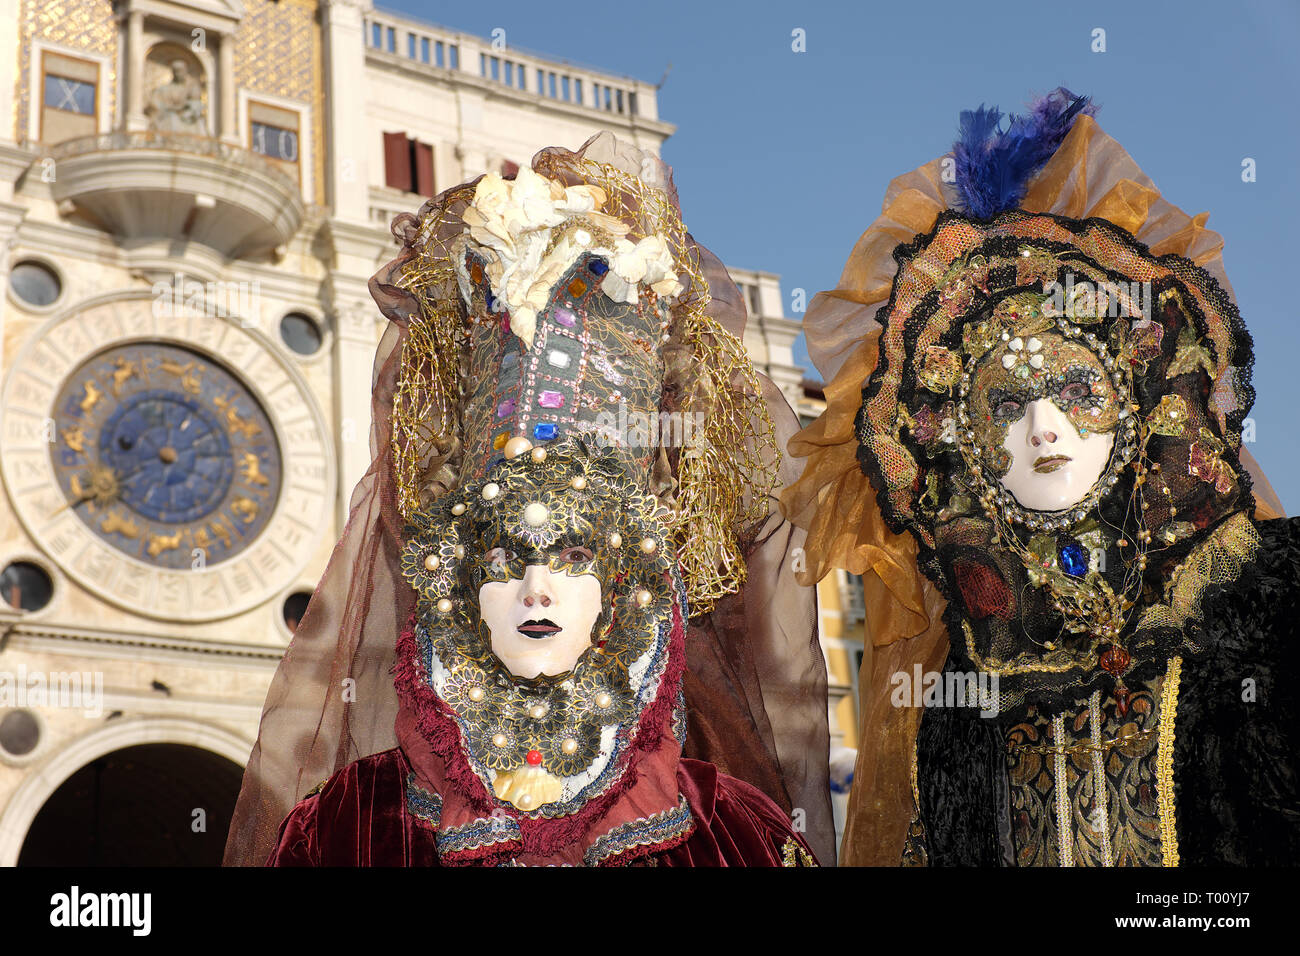 Couple dressed in traditional mask and costume for Venice Carnival standing in Piazza San Marco, Venice, Veneto, Italy Stock Photo